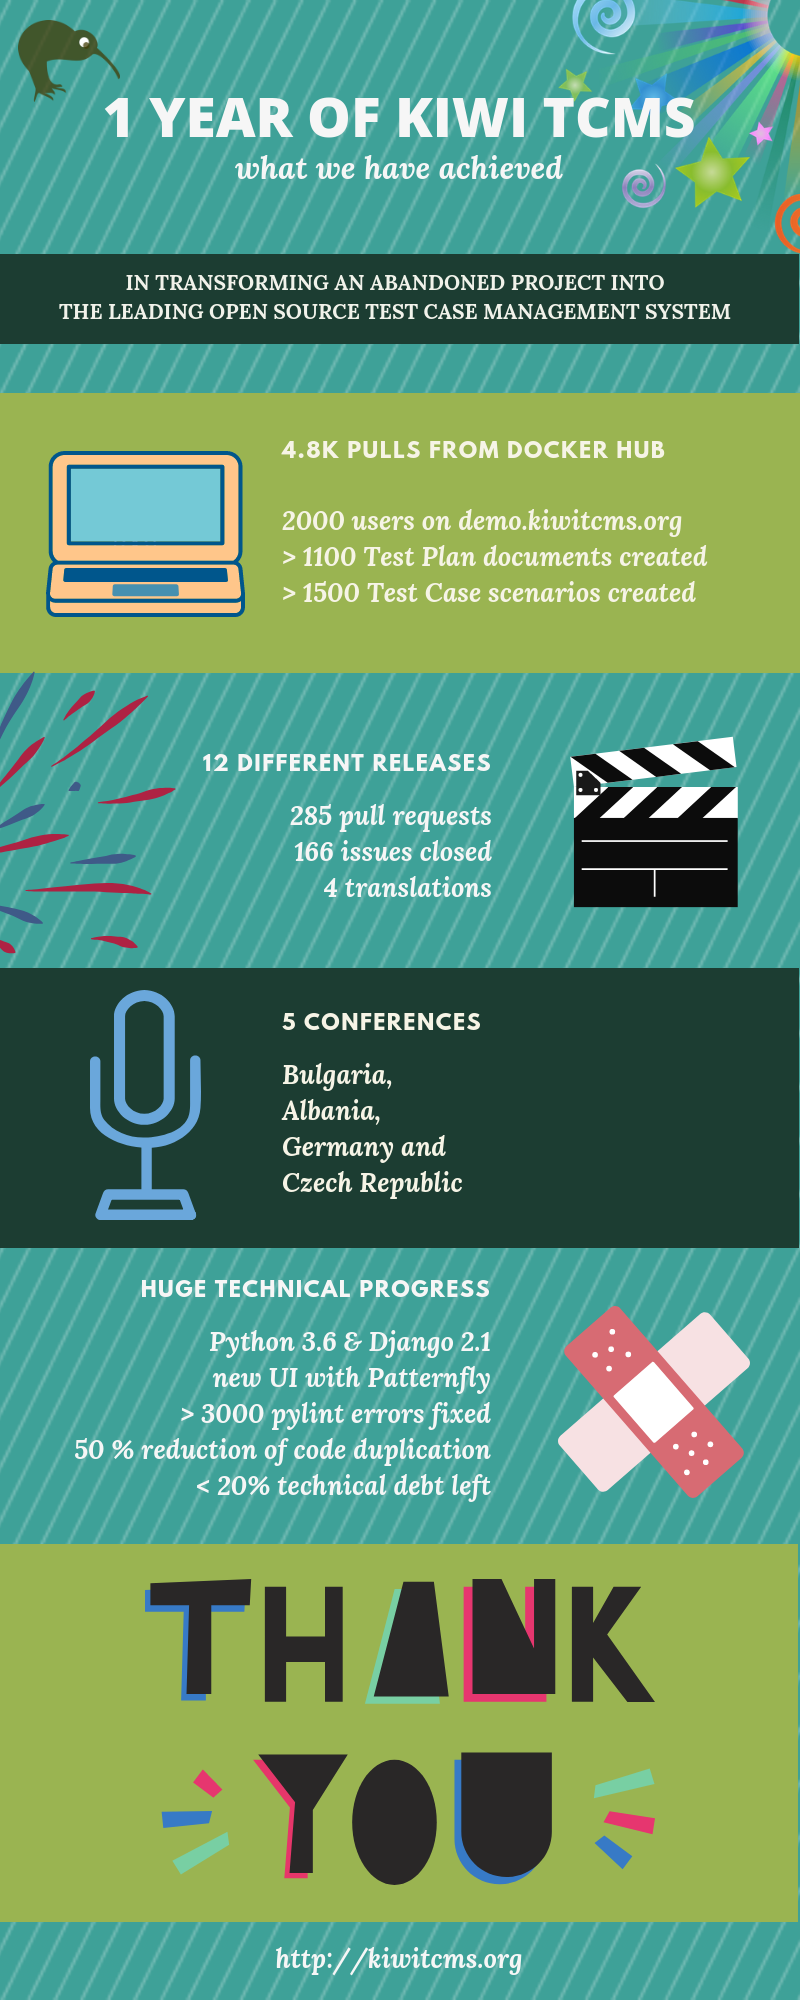 1 year infographic